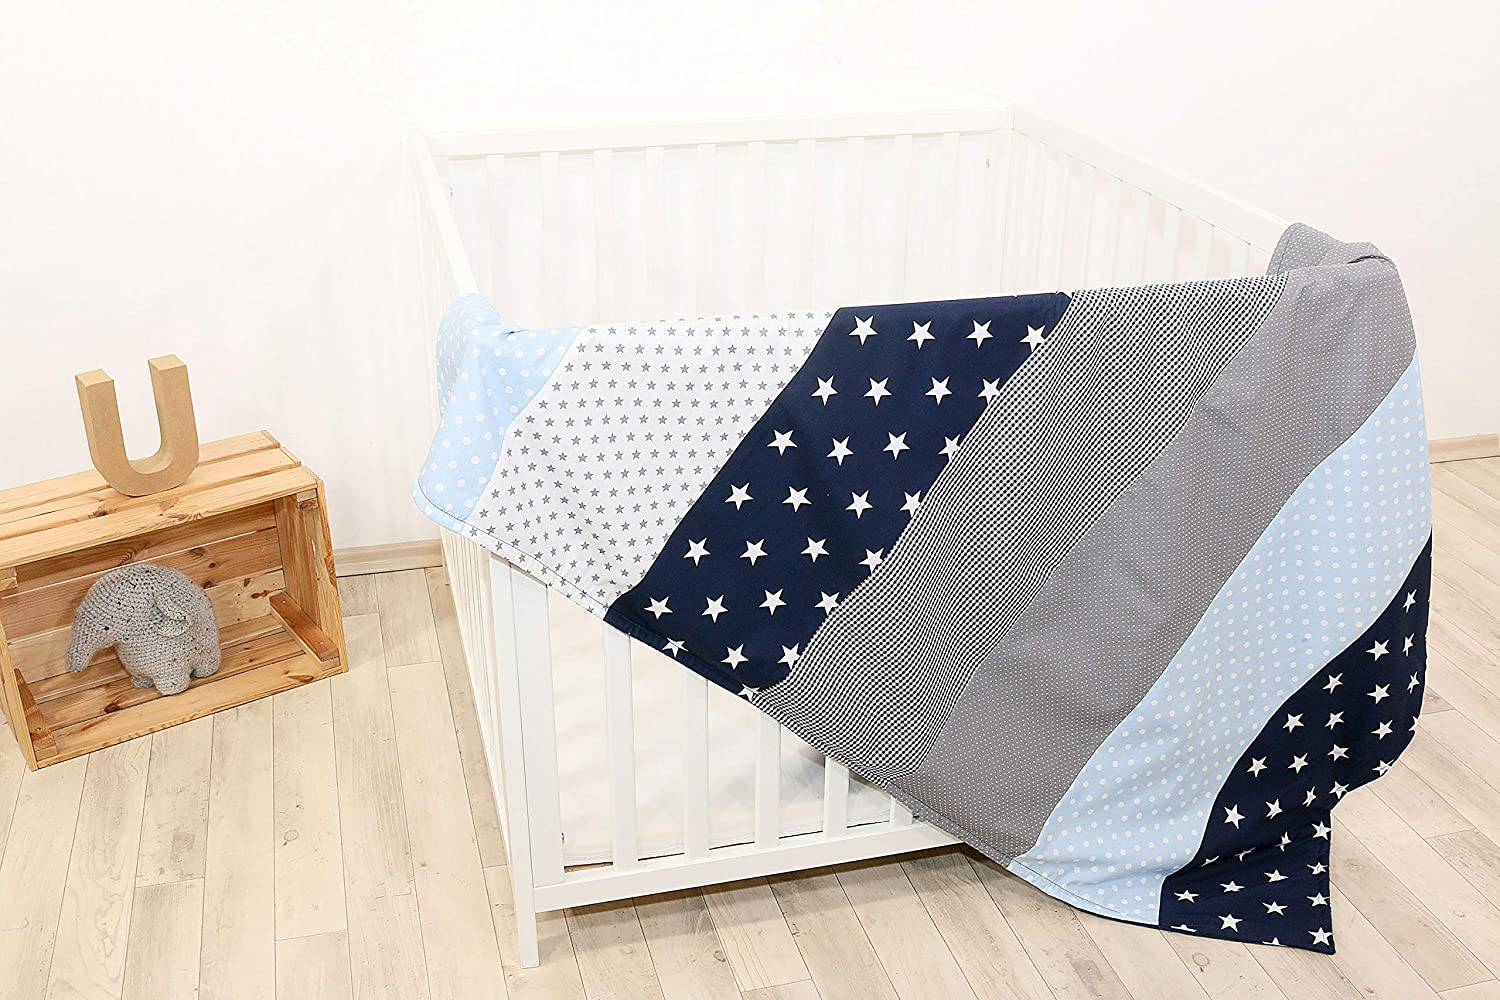 ULLENBOOM® Baby Blanket made of ÖkoTex Cotton and Fleece, Ideal as a Pram Blanket or Play Blanket, 70 x 100 cm & 100 x 140 cm and Made in the EU, Design: Stars, Dots, Patchwork 100 x 140 cm light blue